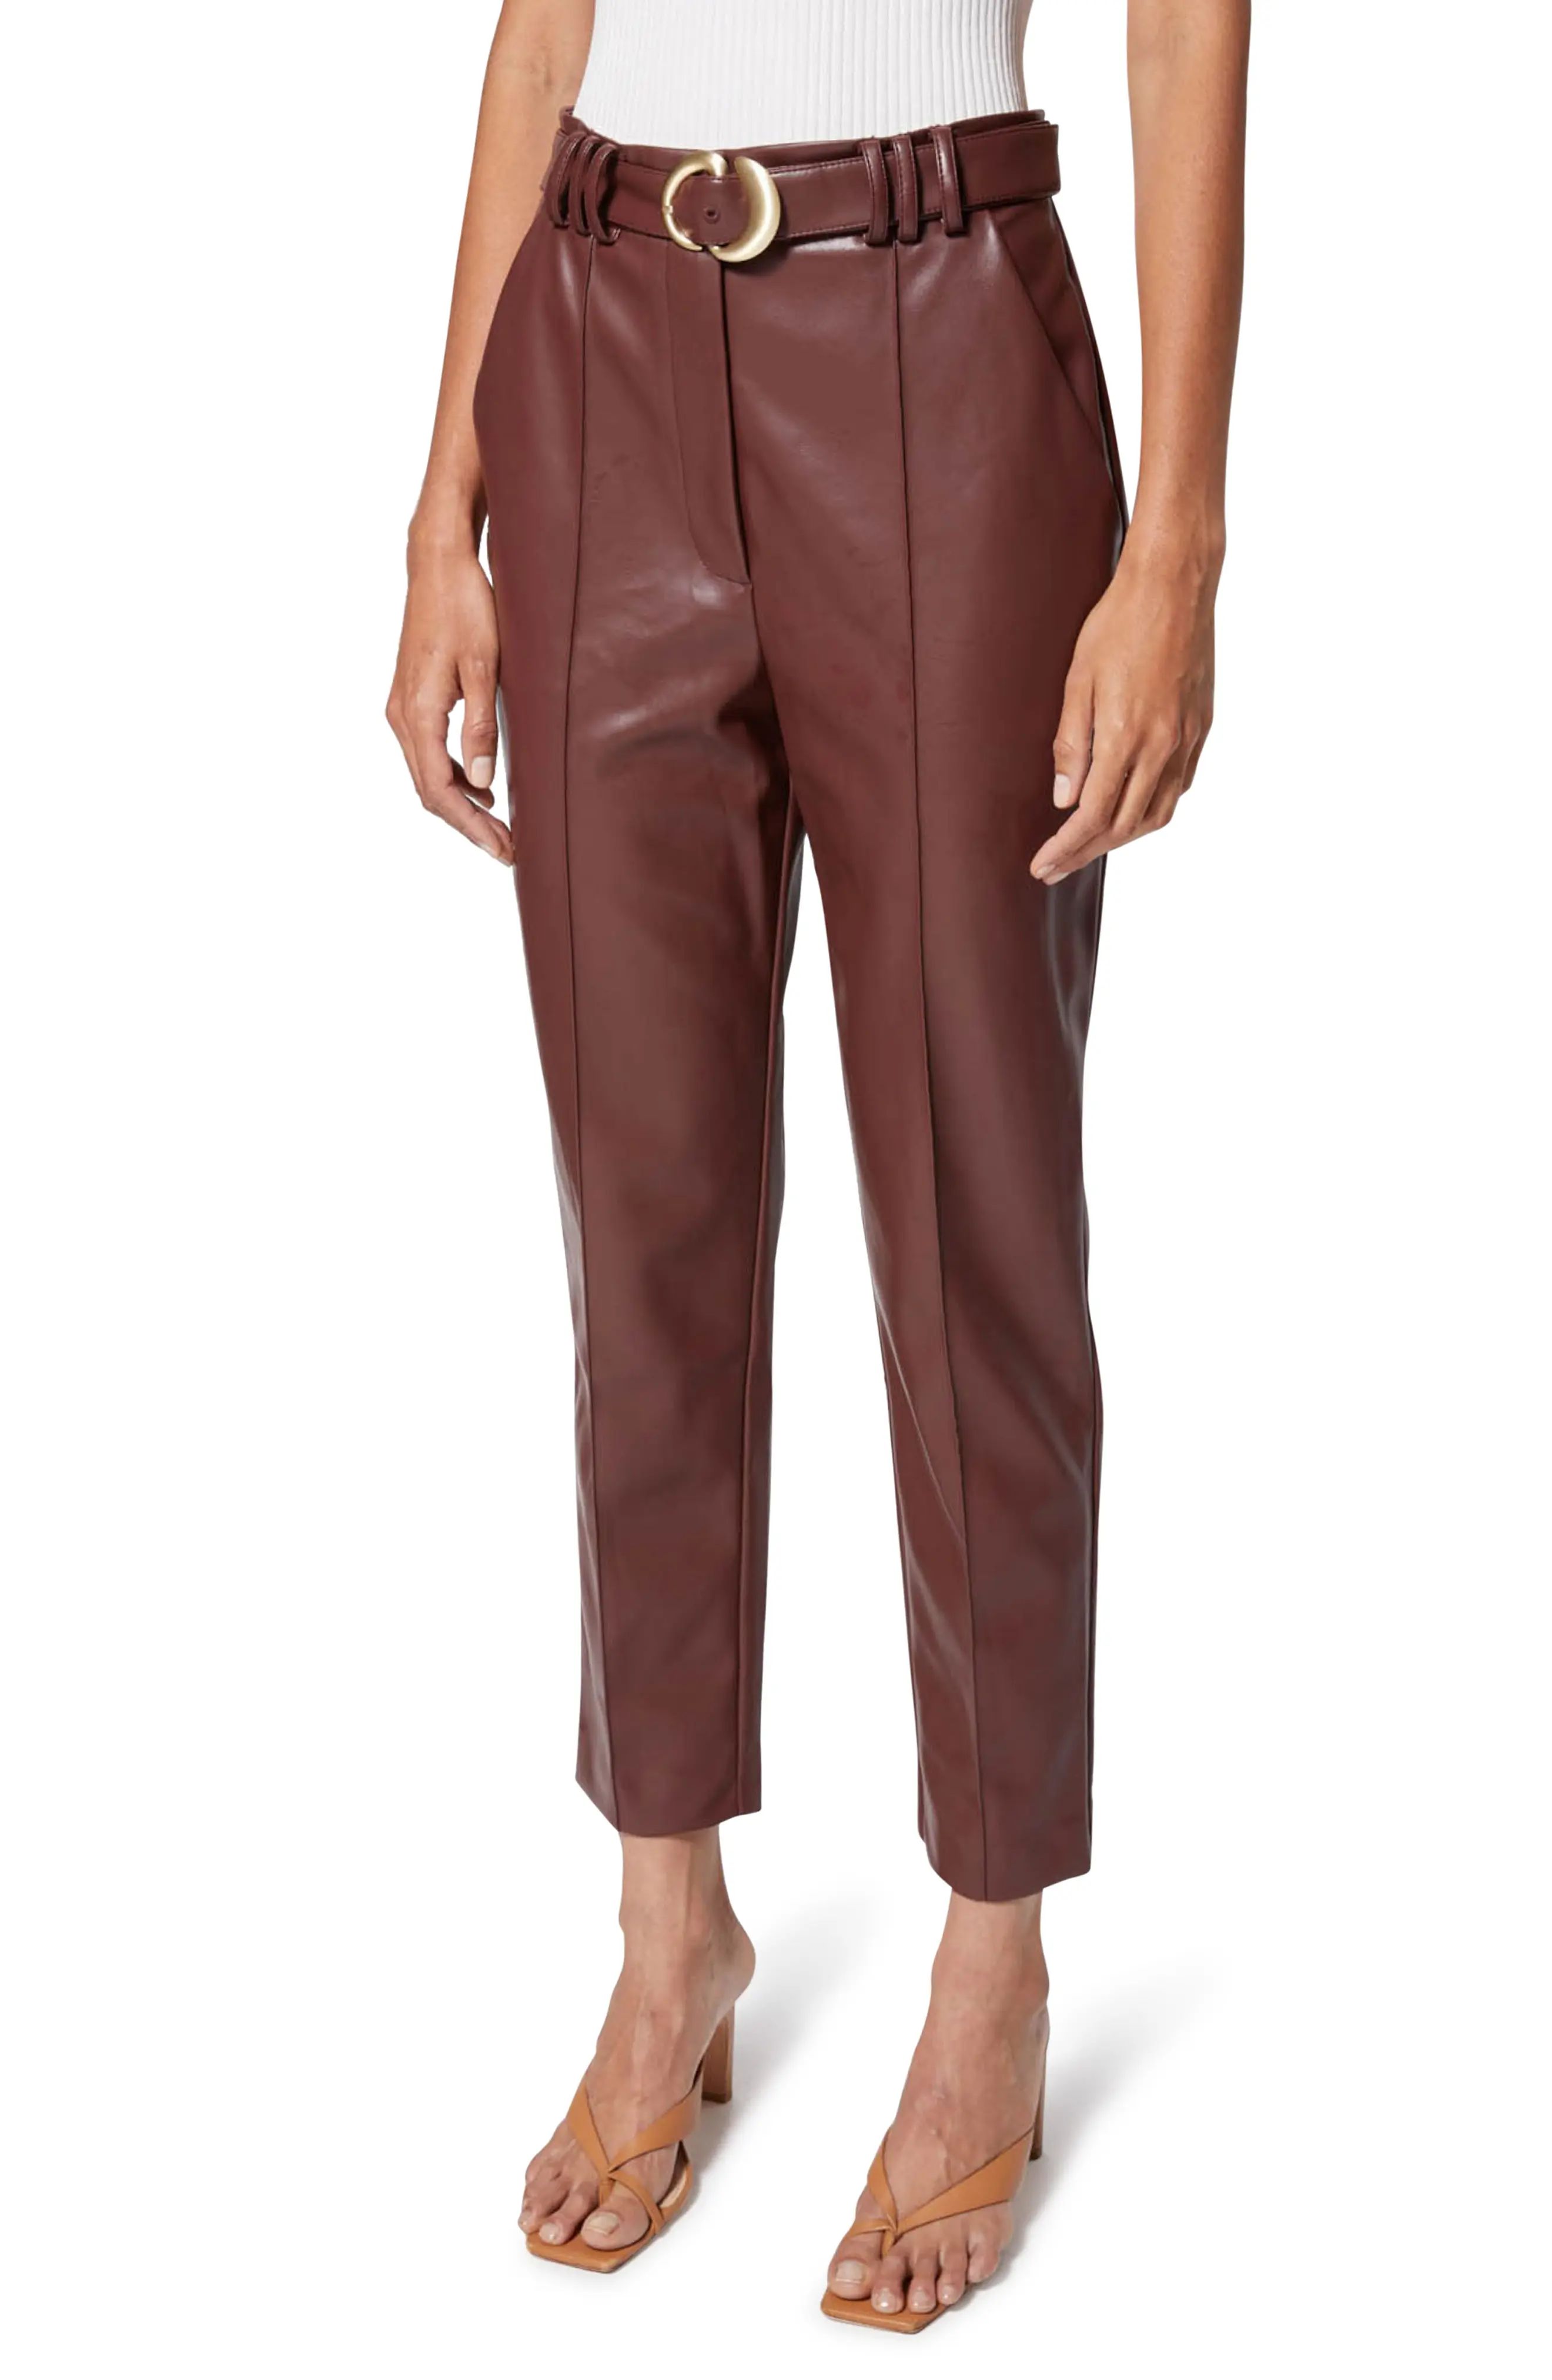 Jonathan Simkhai Pauline Belted Faux Leather Crop Pants in Mahogany at Nordstrom, Size 14 | Nordstrom